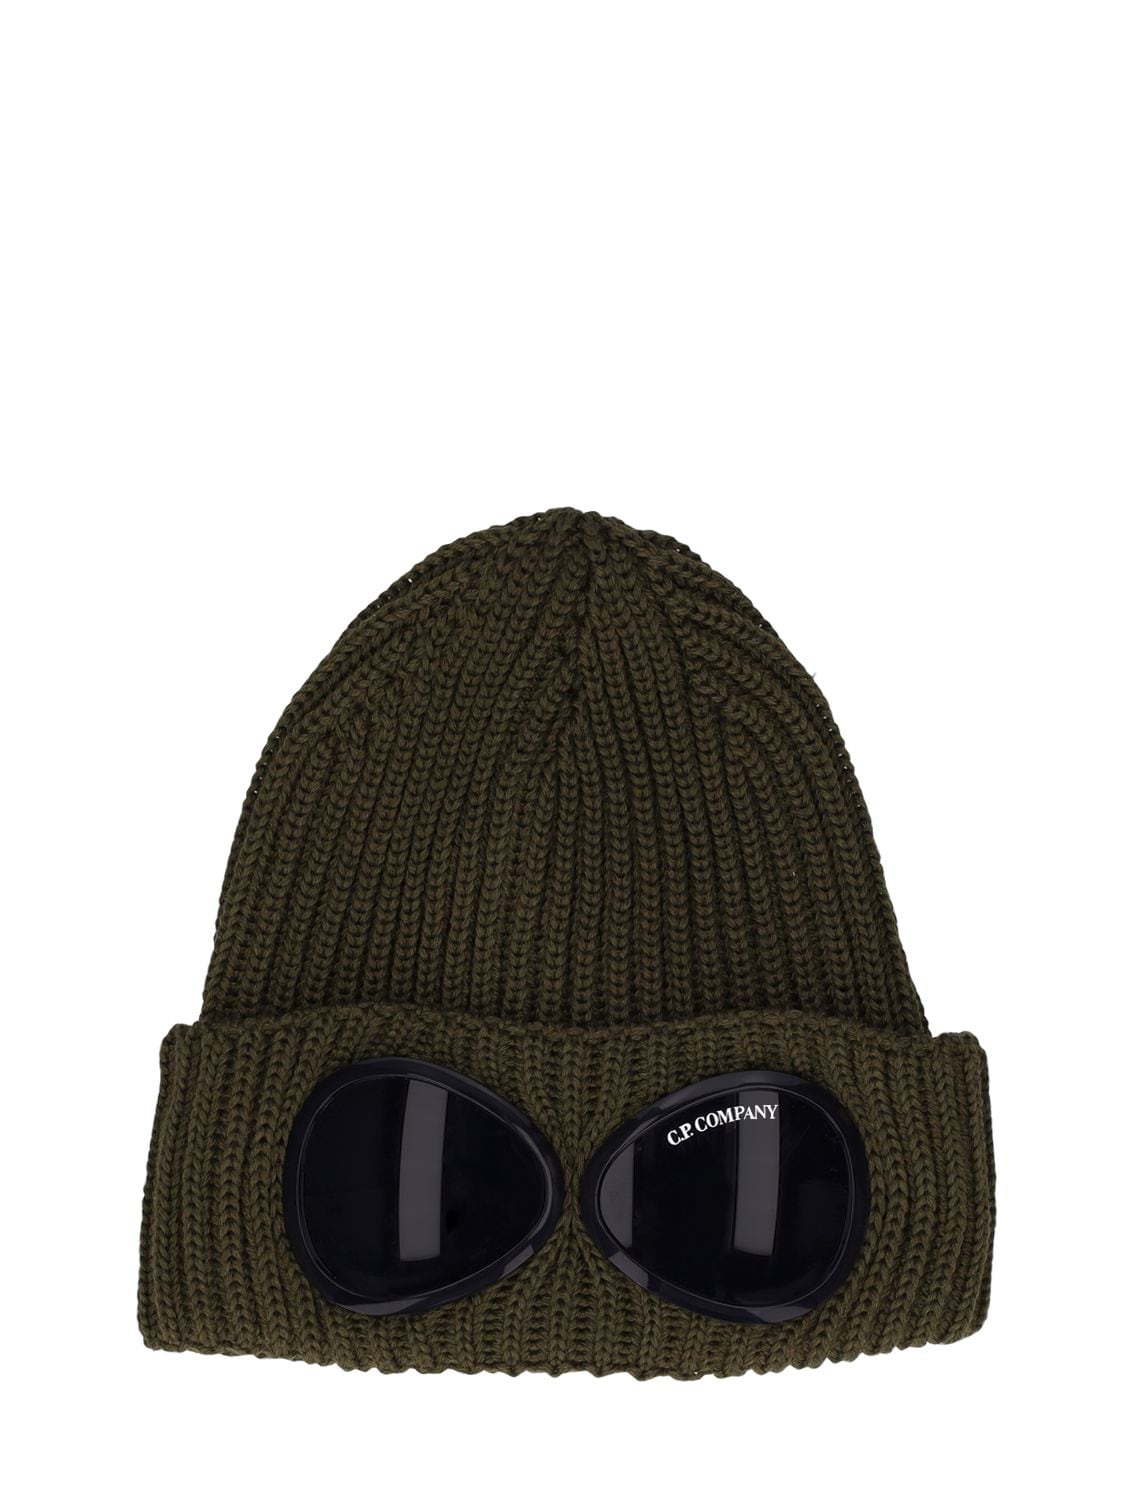 C.p. Company Knit Wool Beanie W/ Decorative Goggles In Dusty Olive